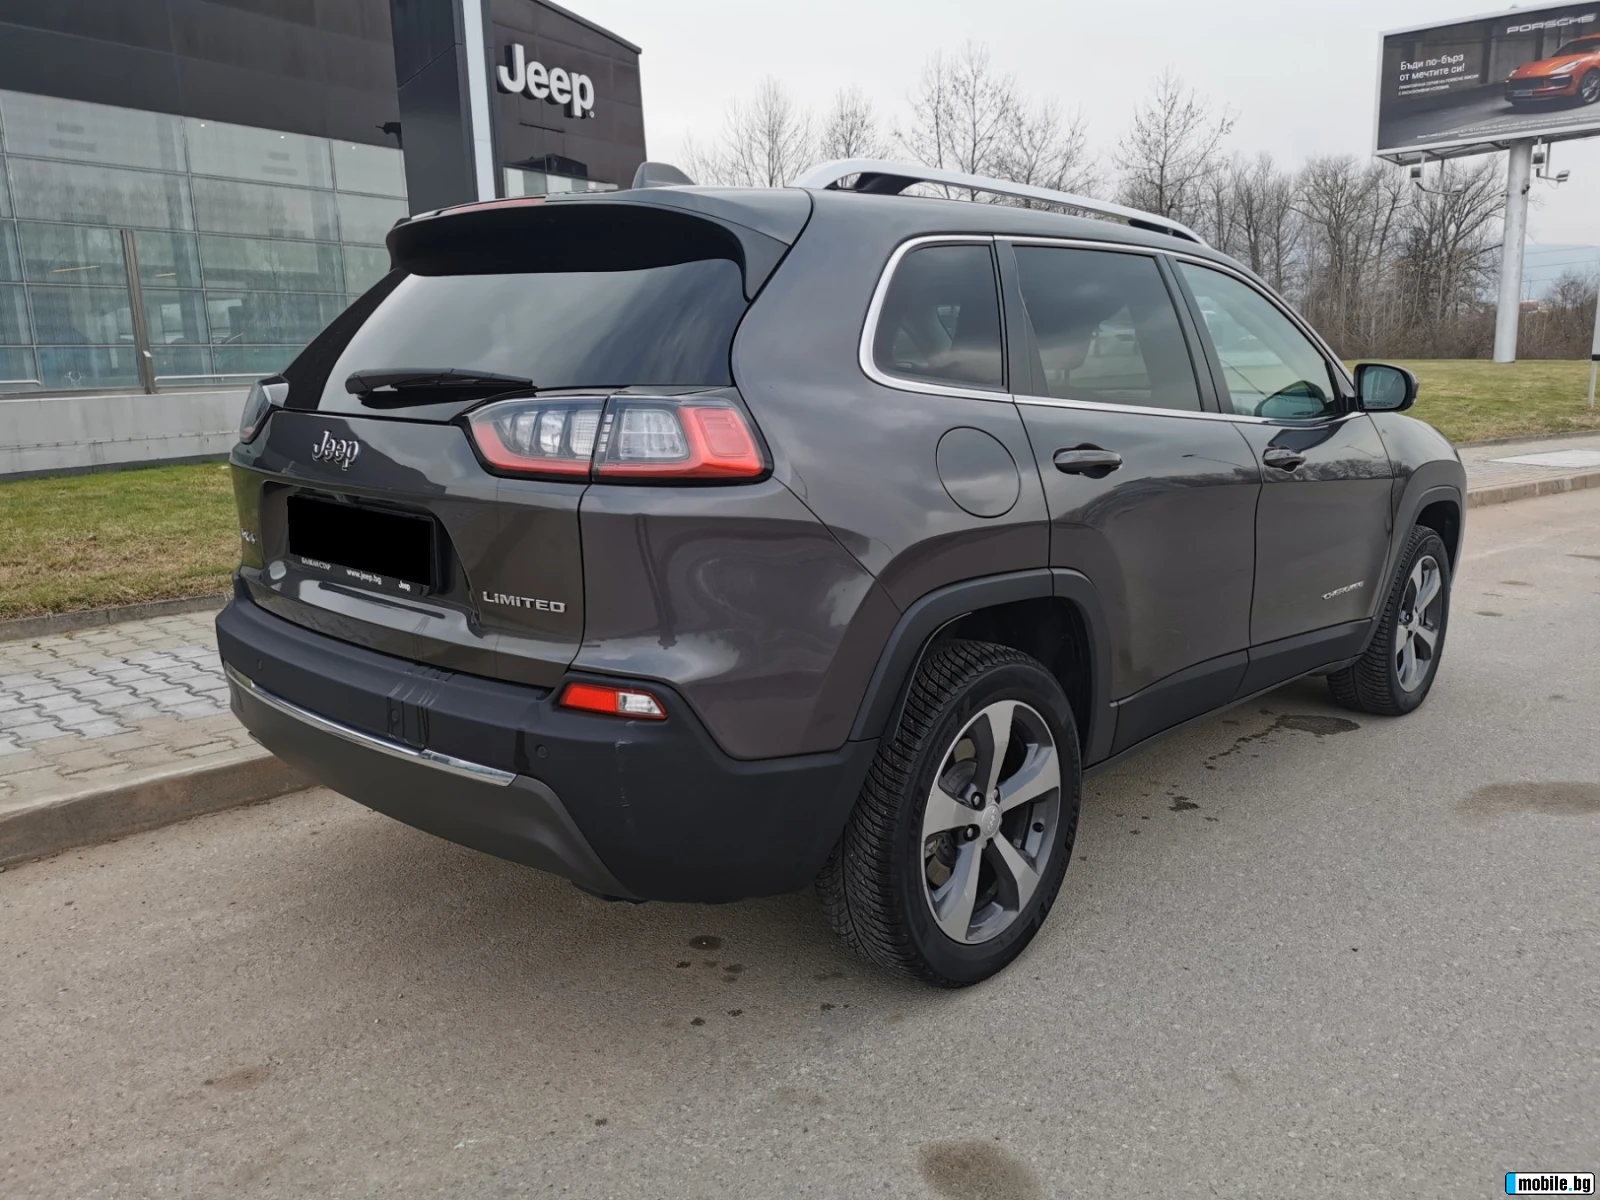 Jeep Cherokee LIMITED 2.2D AWD | Mobile.bg   5